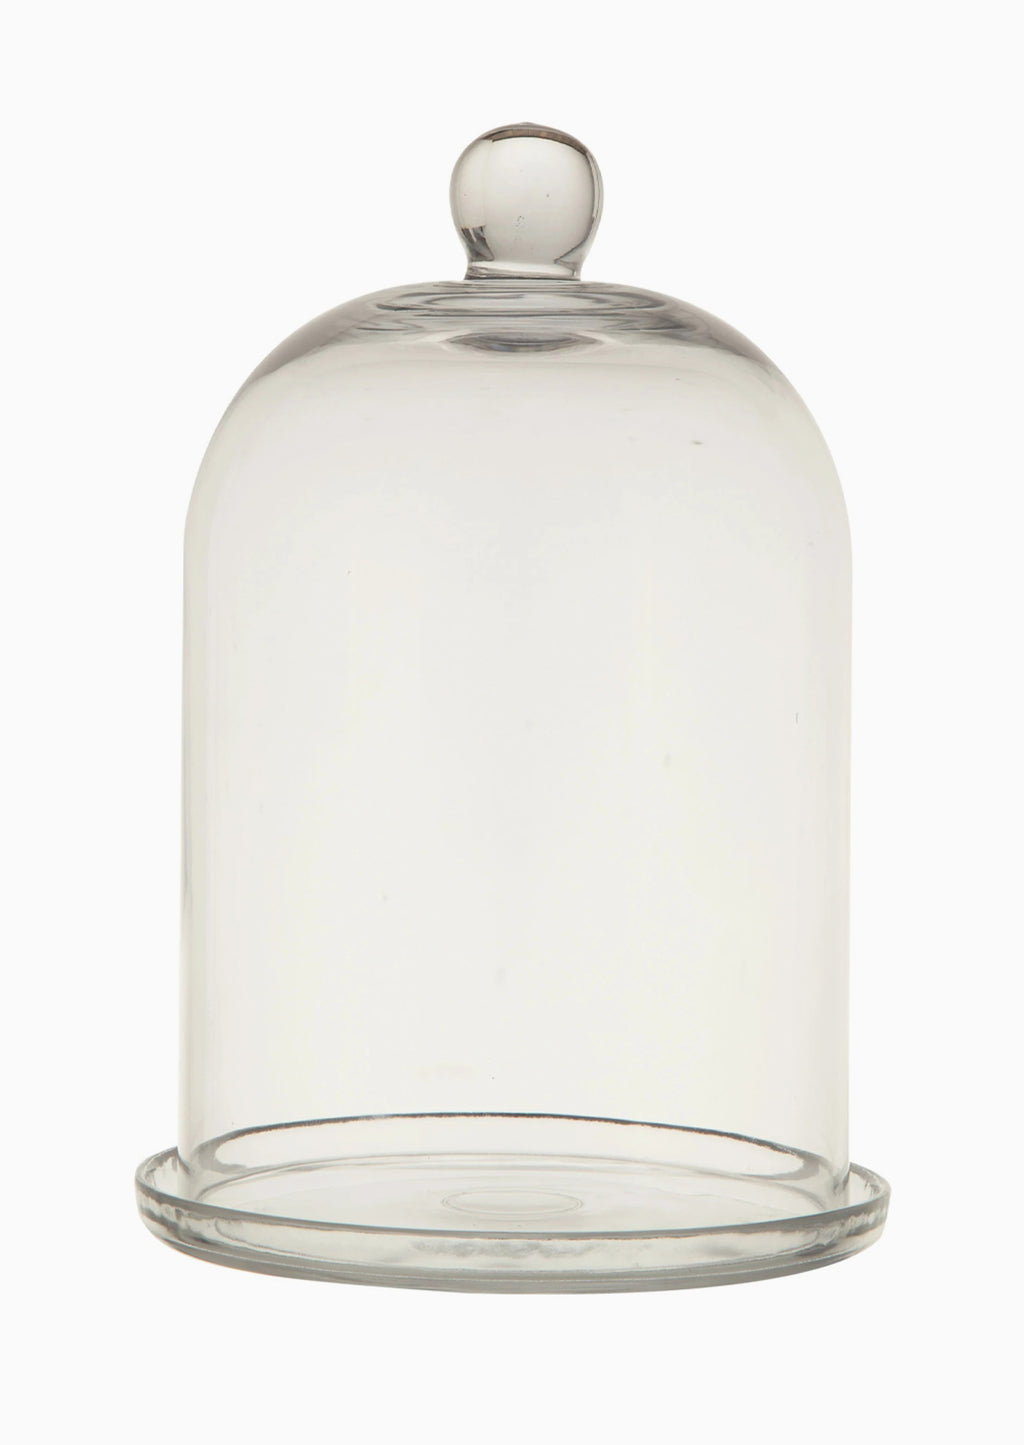 2: An all glass cloche with base.